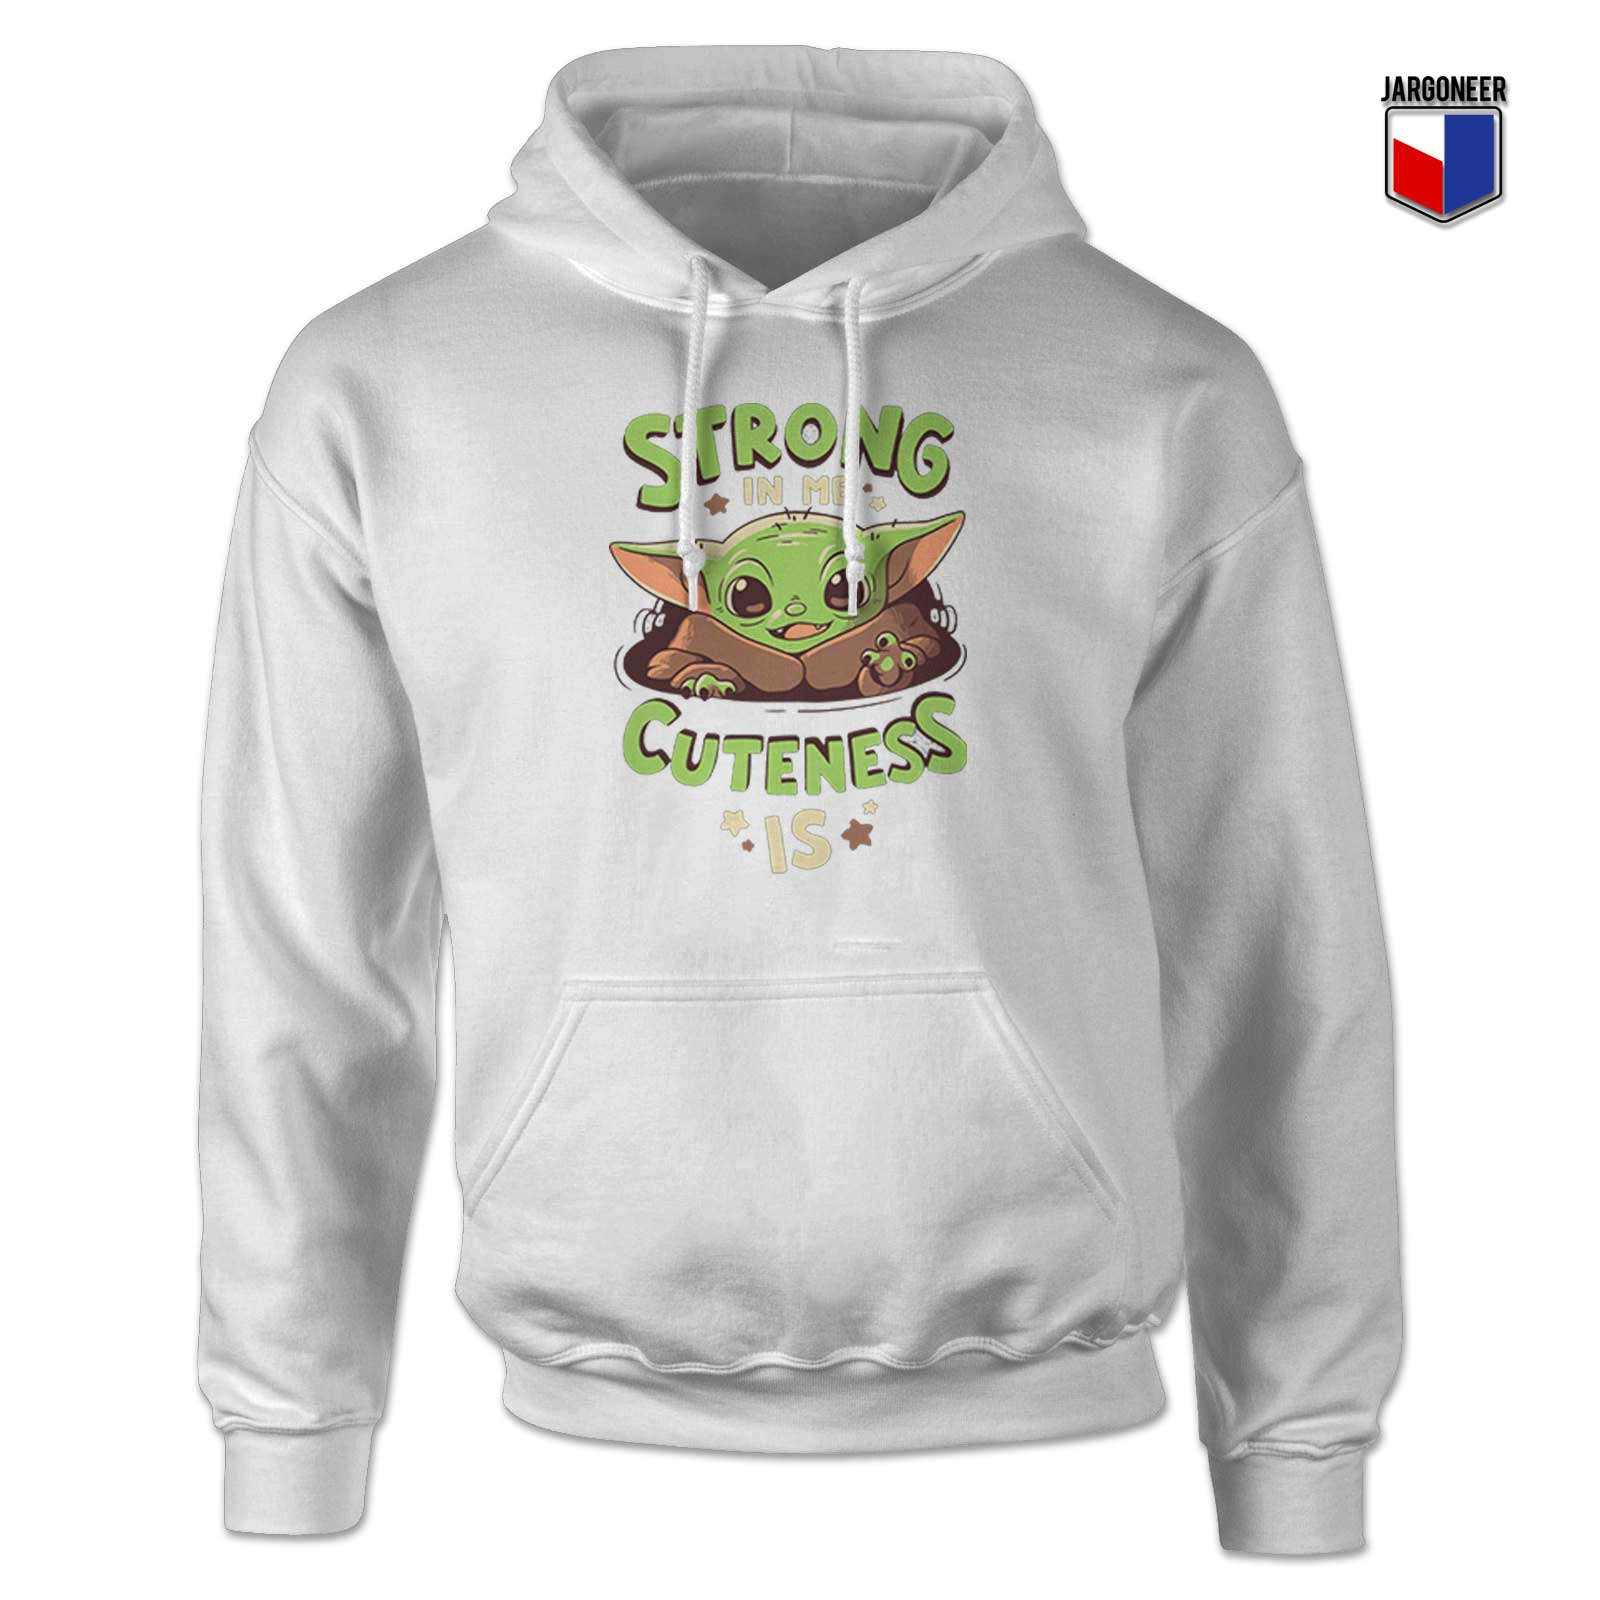 Strong In Me Cuteness Is Yoda Hoodie - Shop Unique Graphic Cool Shirt Designs